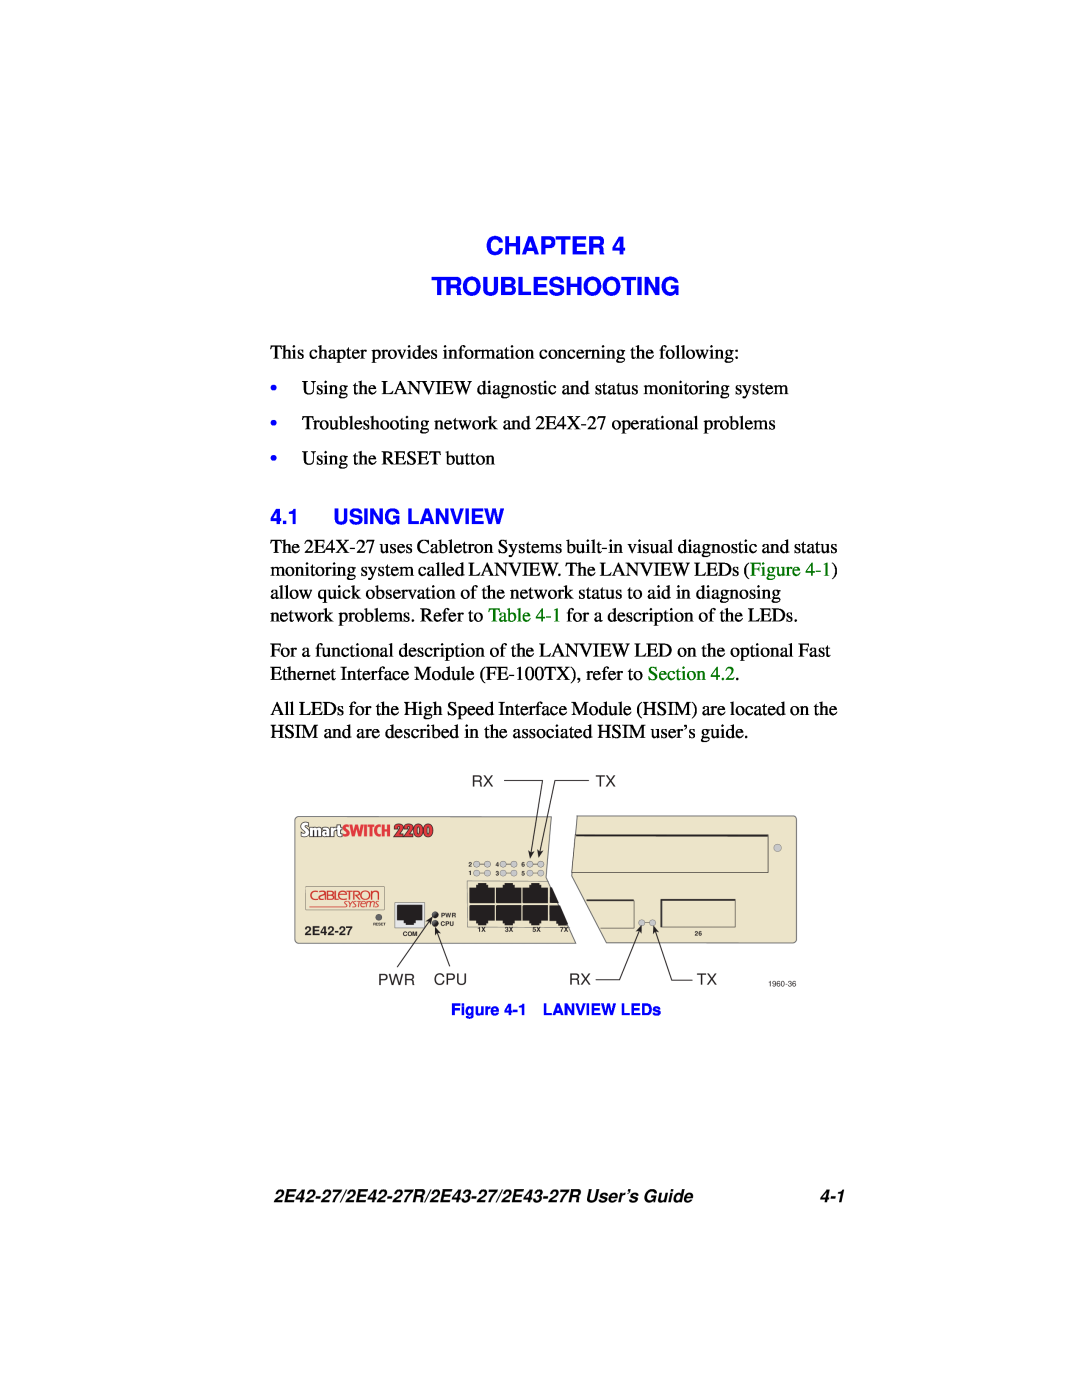 Cabletron Systems 2E43-27R, 2E42-27R manual Chapter Troubleshooting, Using Lanview 